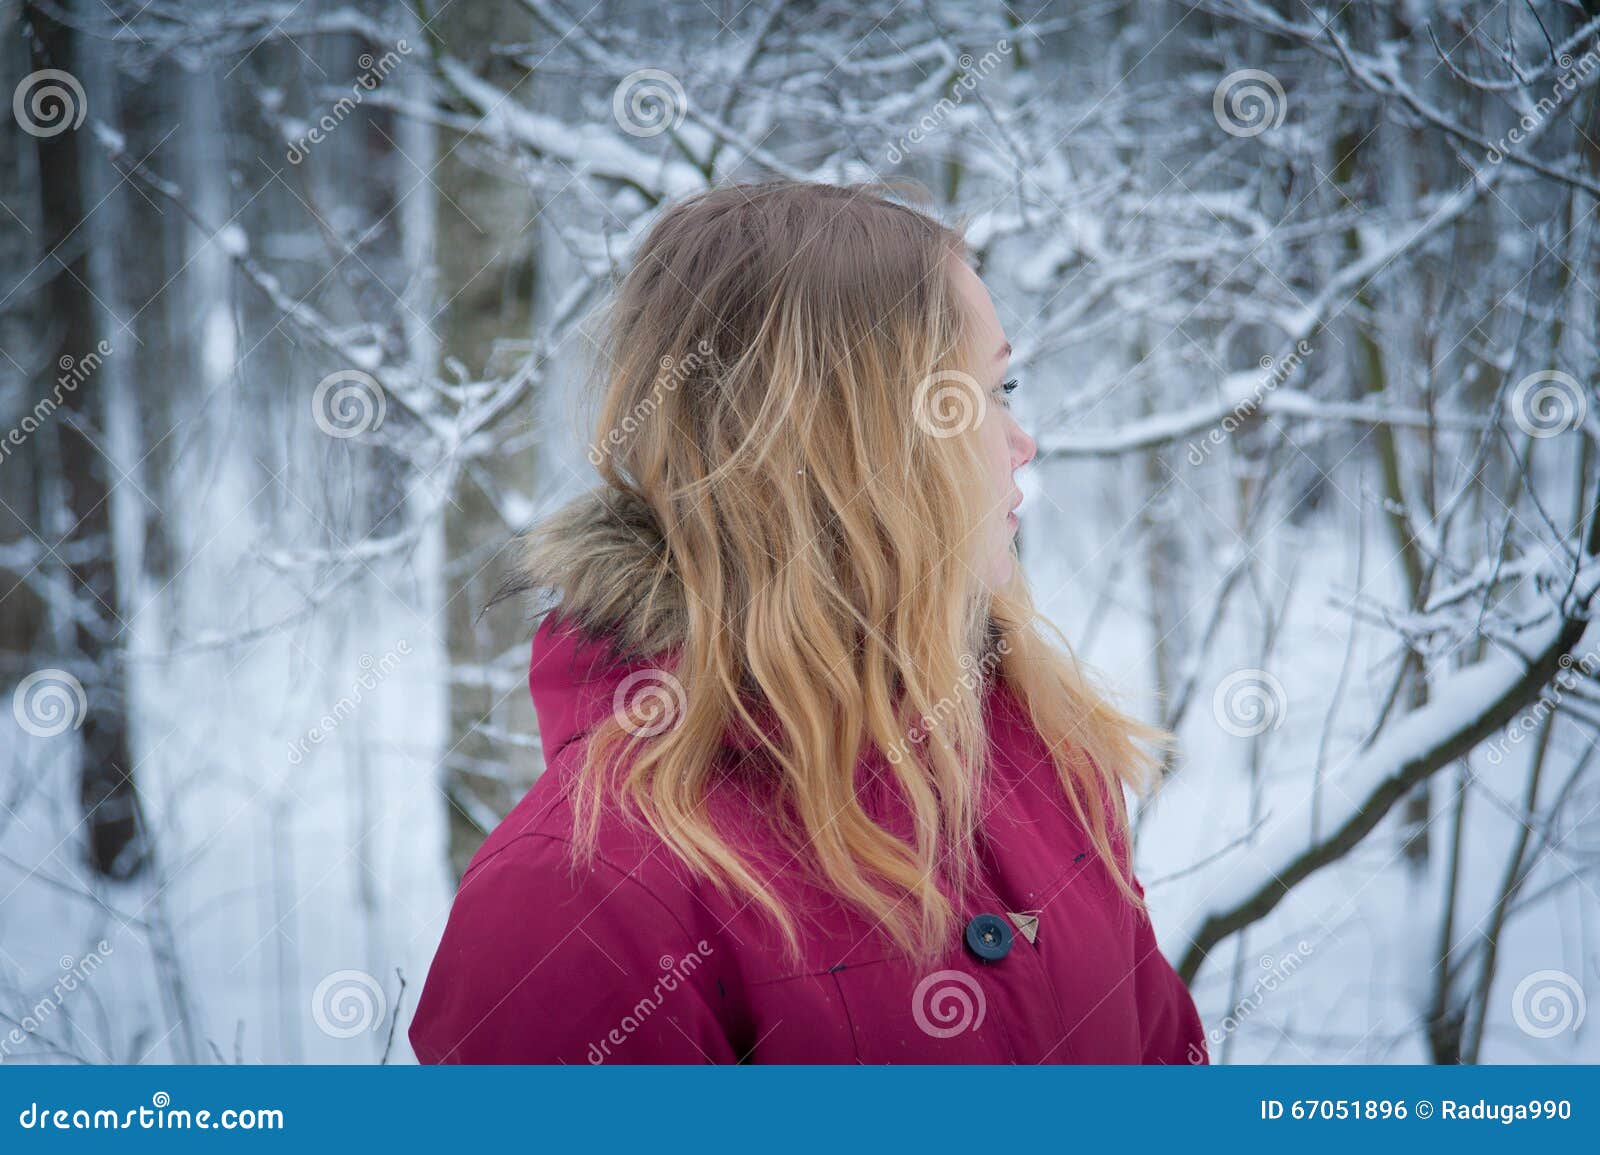 Girl in the forest stock photo. Image of teenage, snow - 67051896